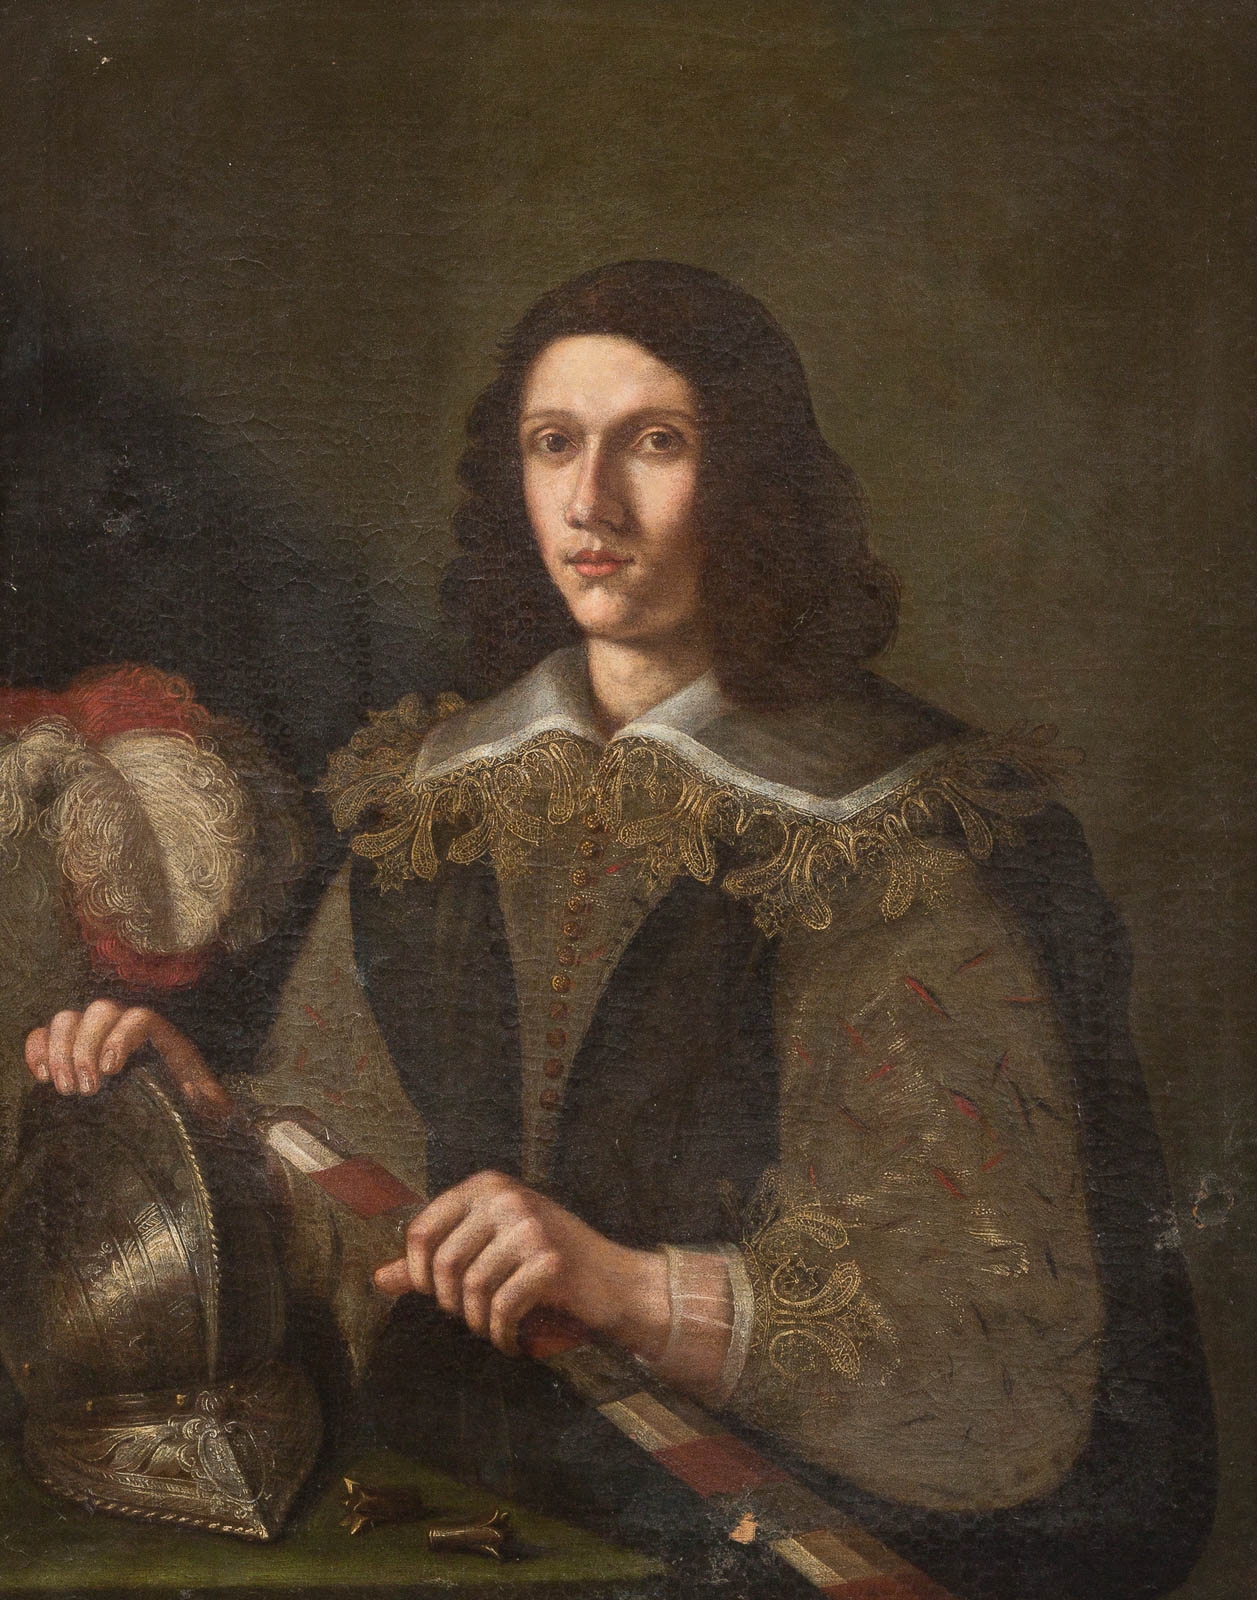 Artwork by Brescian School, 17th Century, Portrait of a Condottiero from the Gambara Family Holding a General Baton, Made of Oil on canvas